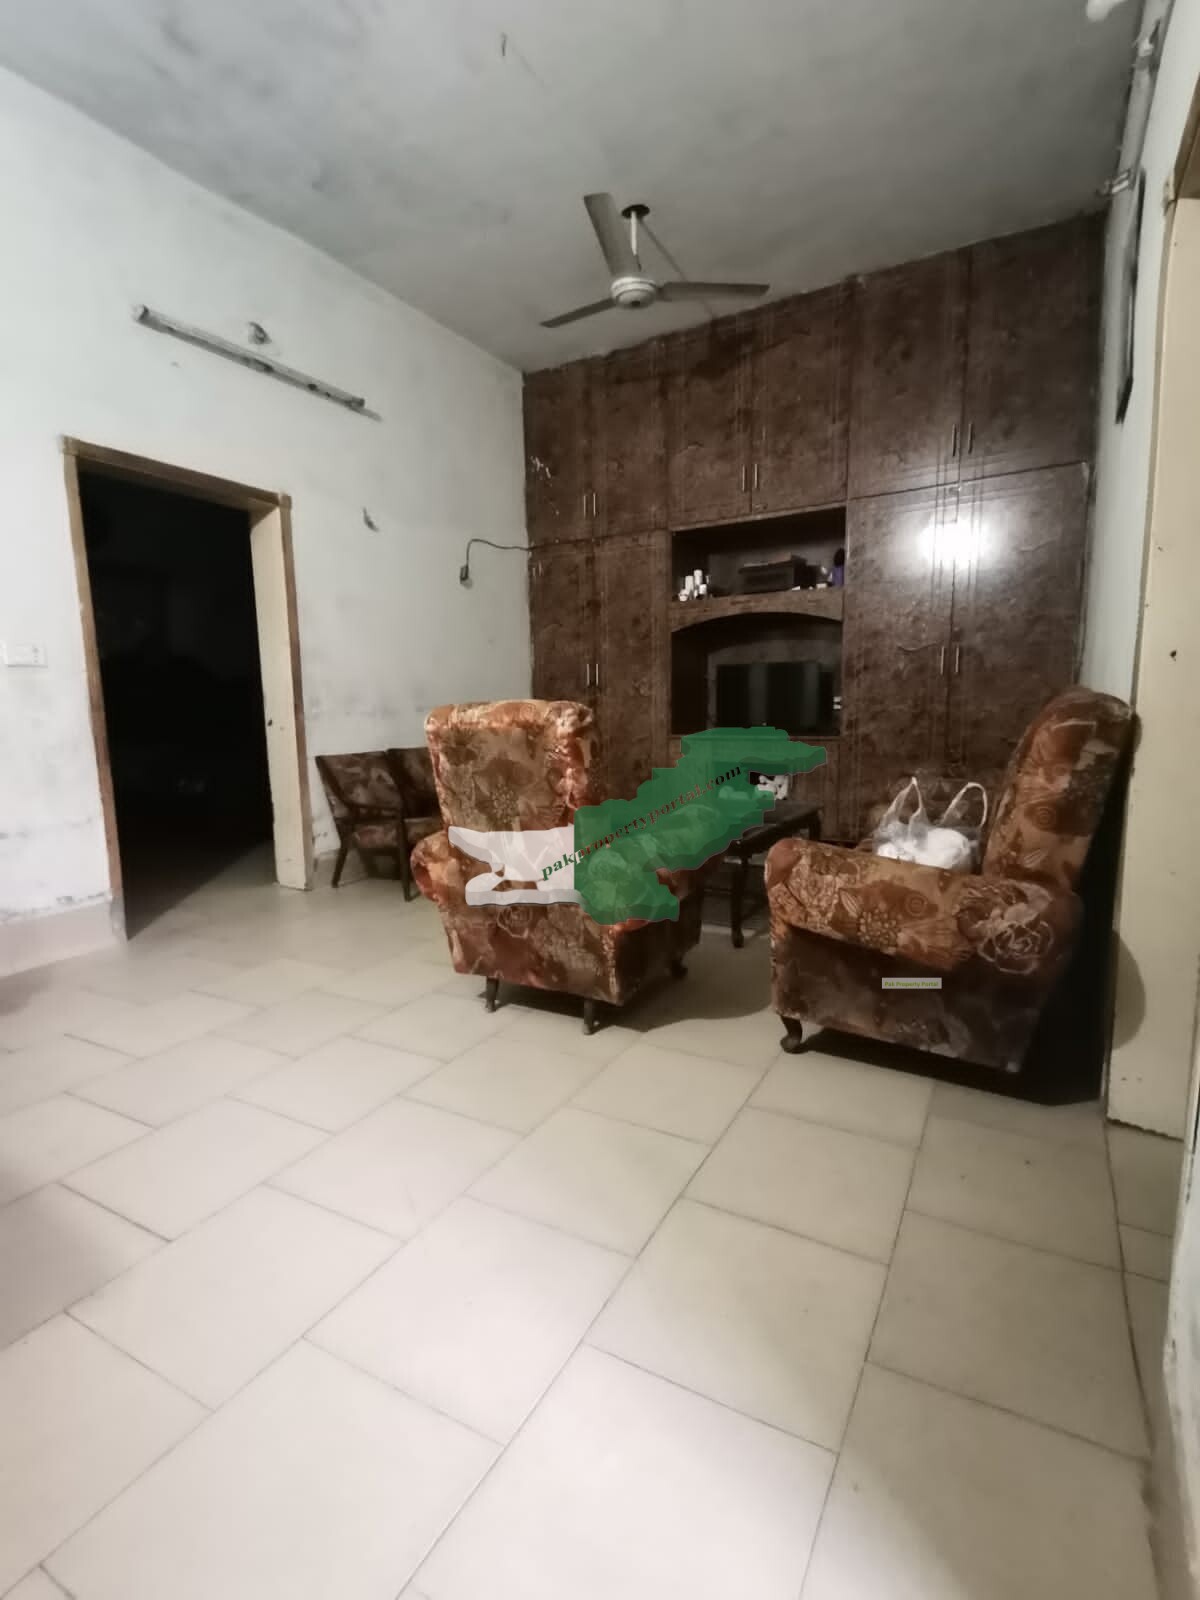 5 Marla one and a half story story house for sale in Ghang Road Street No. 1 Sheikhupura